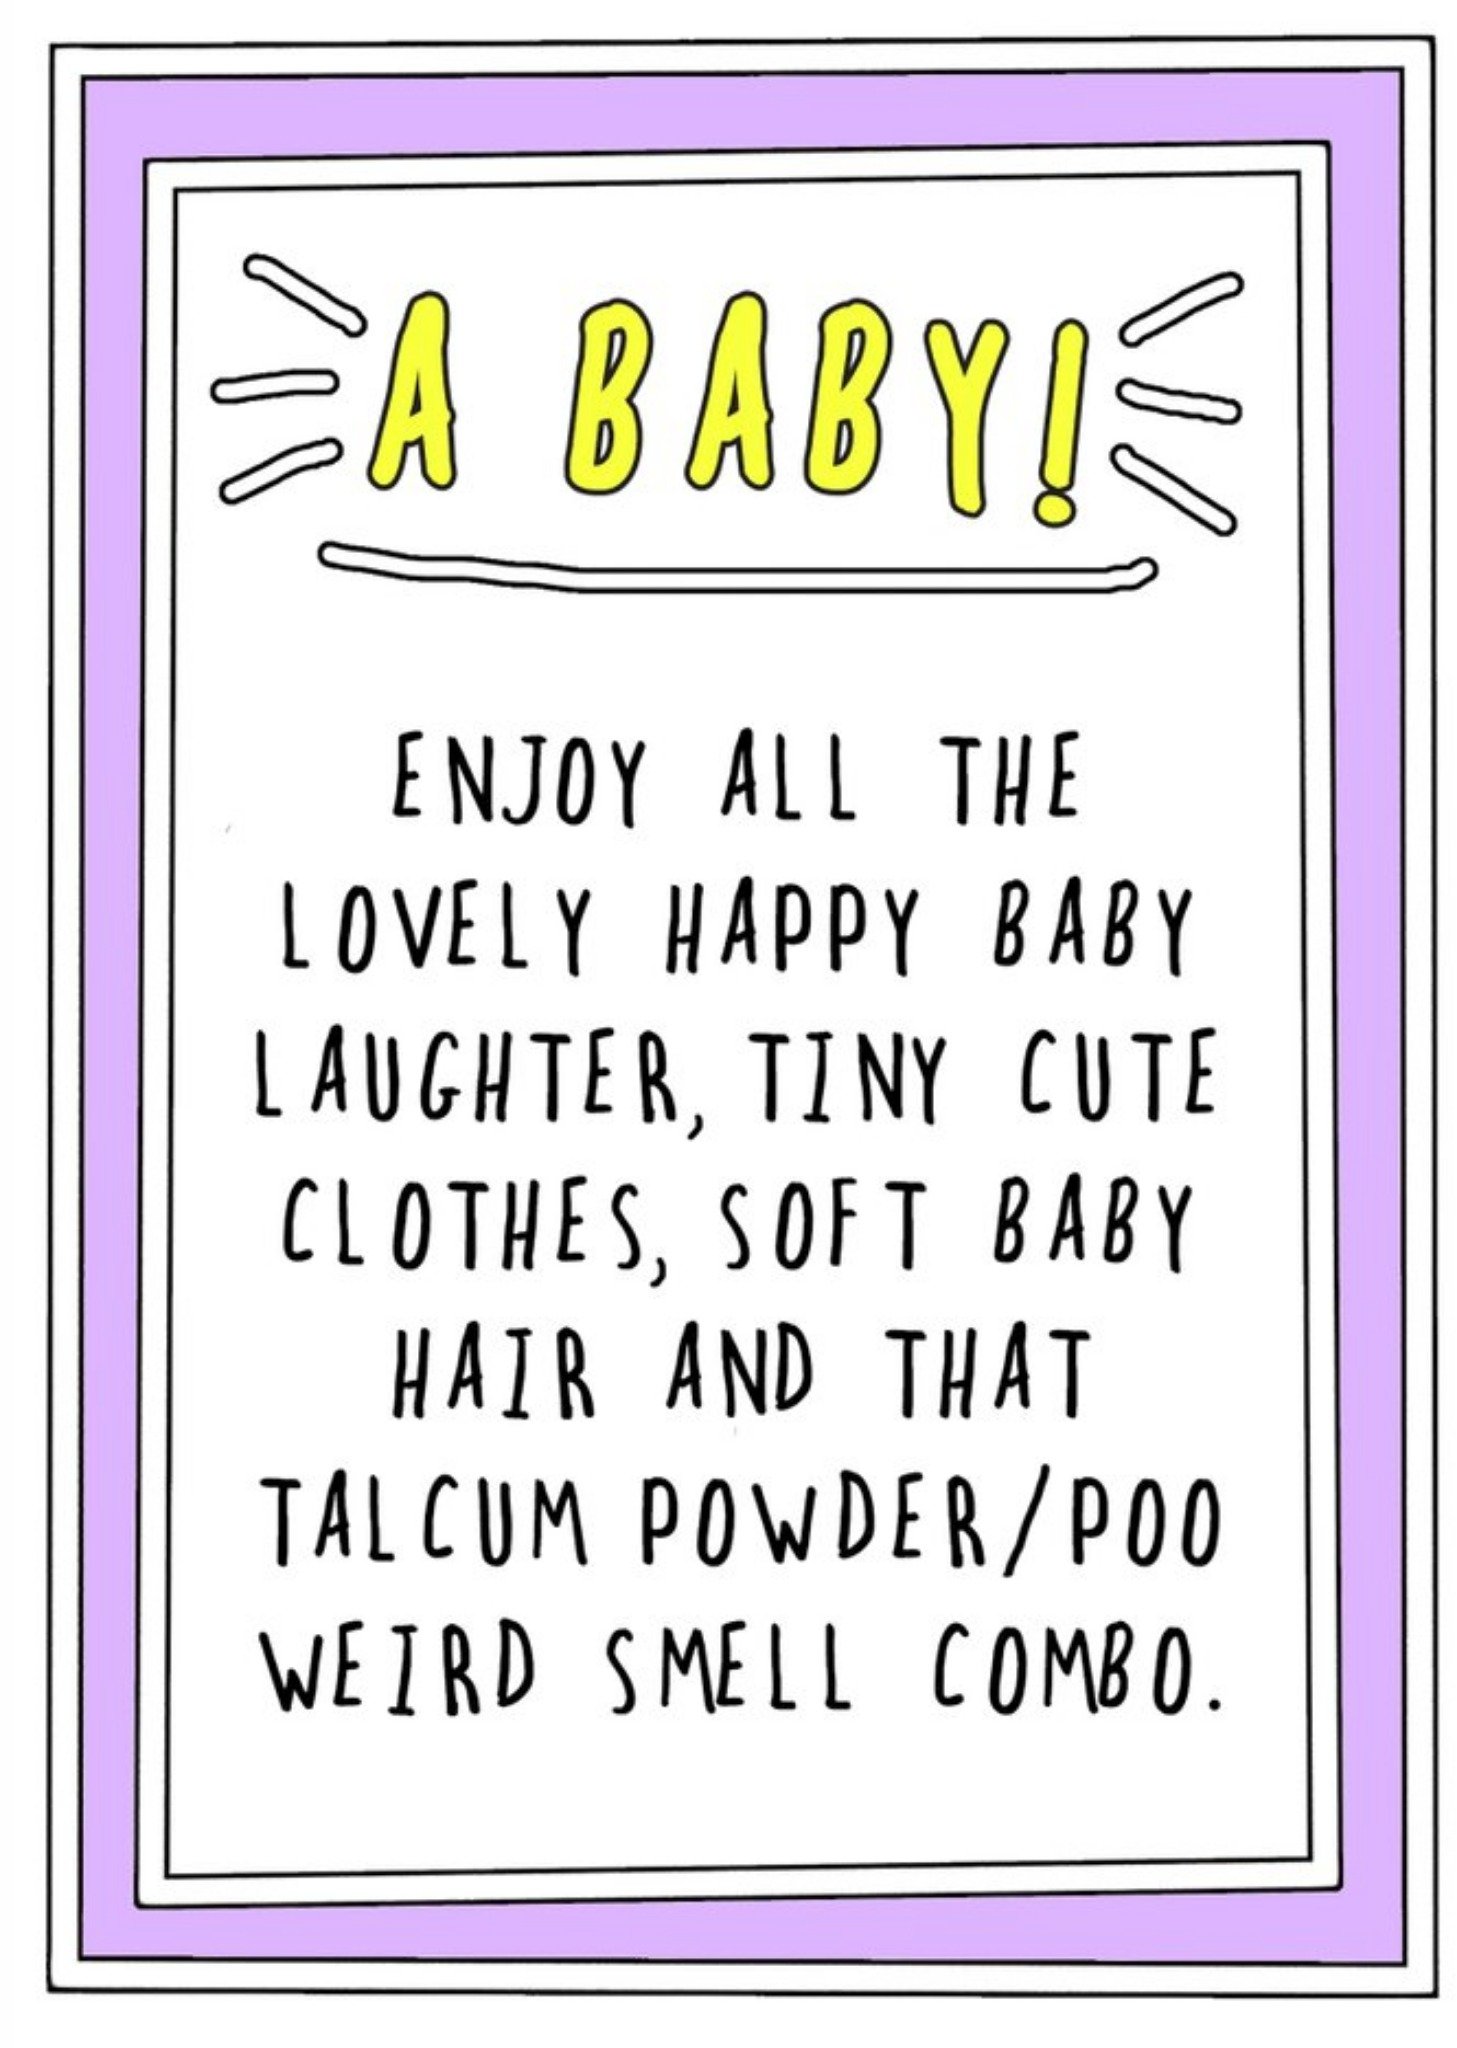 Go La La Funny Talcum Powder, Poo Weird Smell Combo New Baby Card, Large